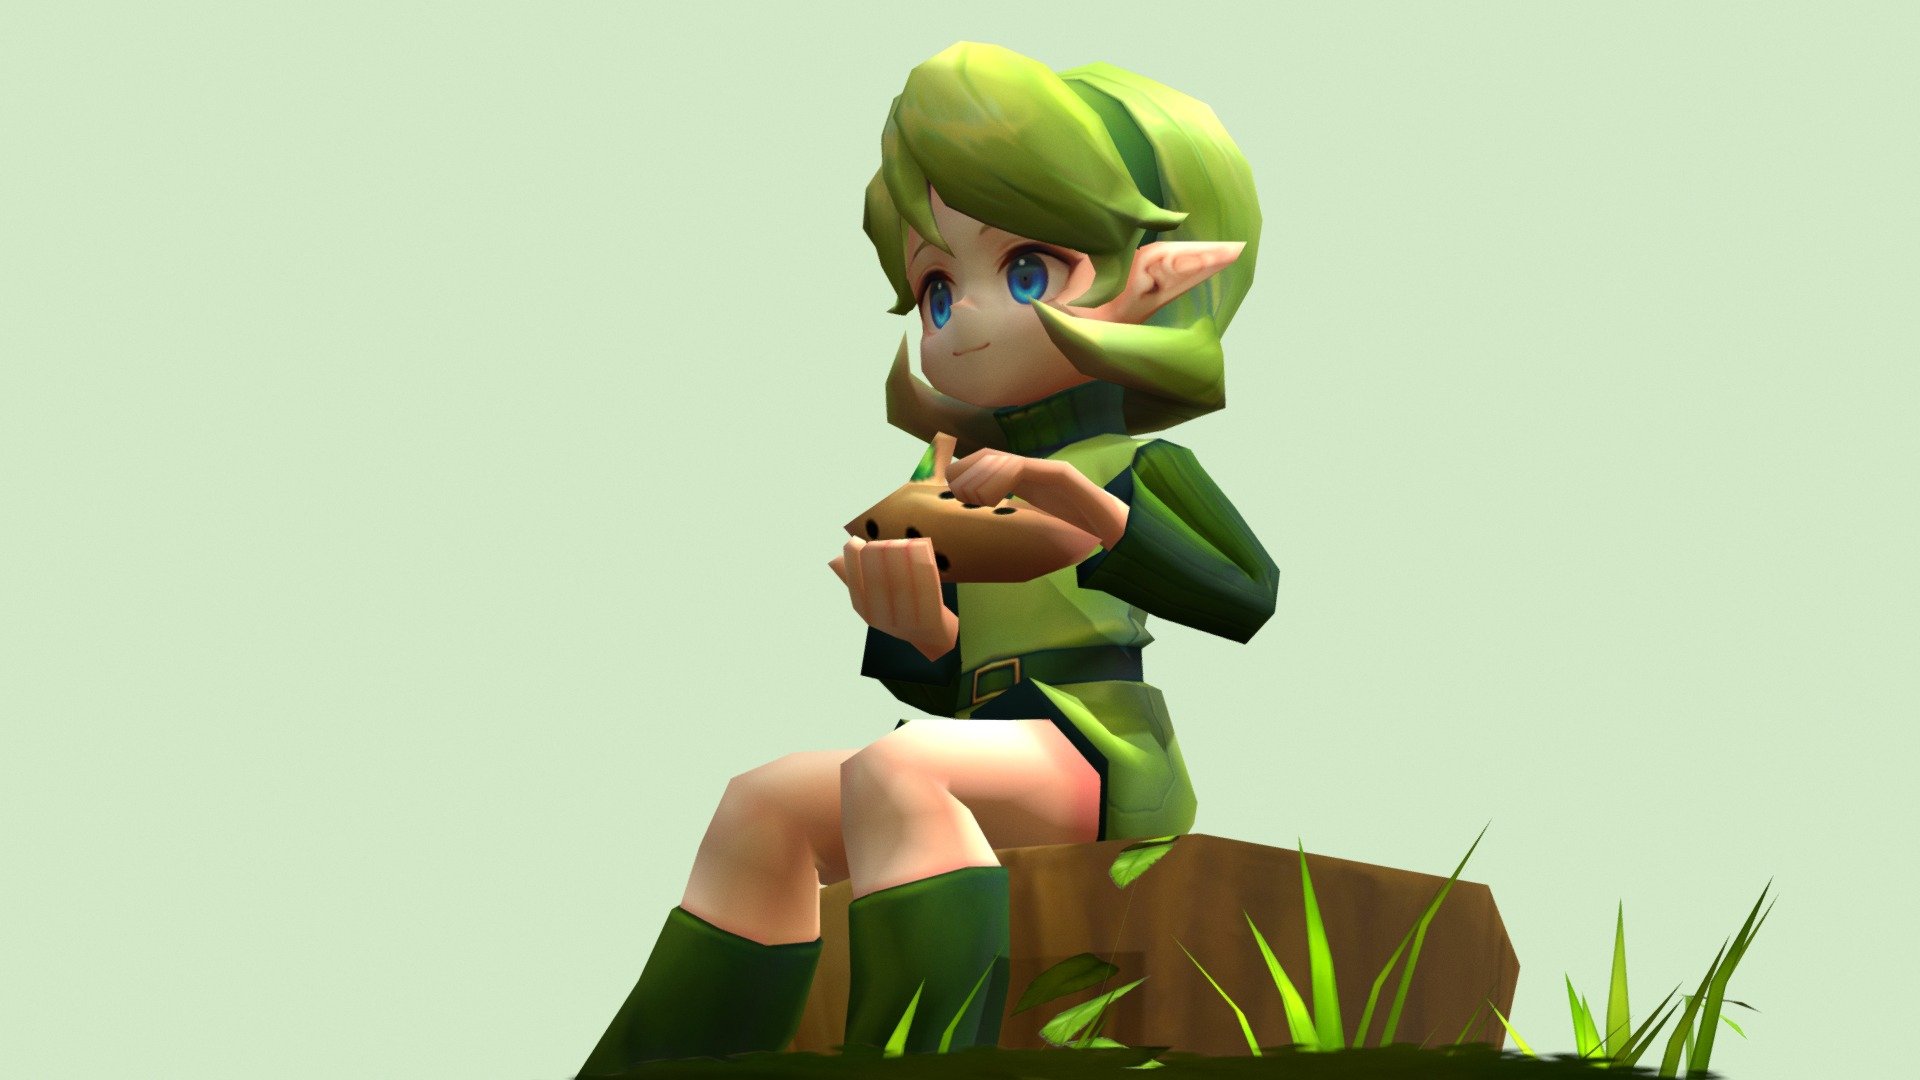 Saria From Ocarina Of Time 3d Model By Ambisched Ambisched 8225746